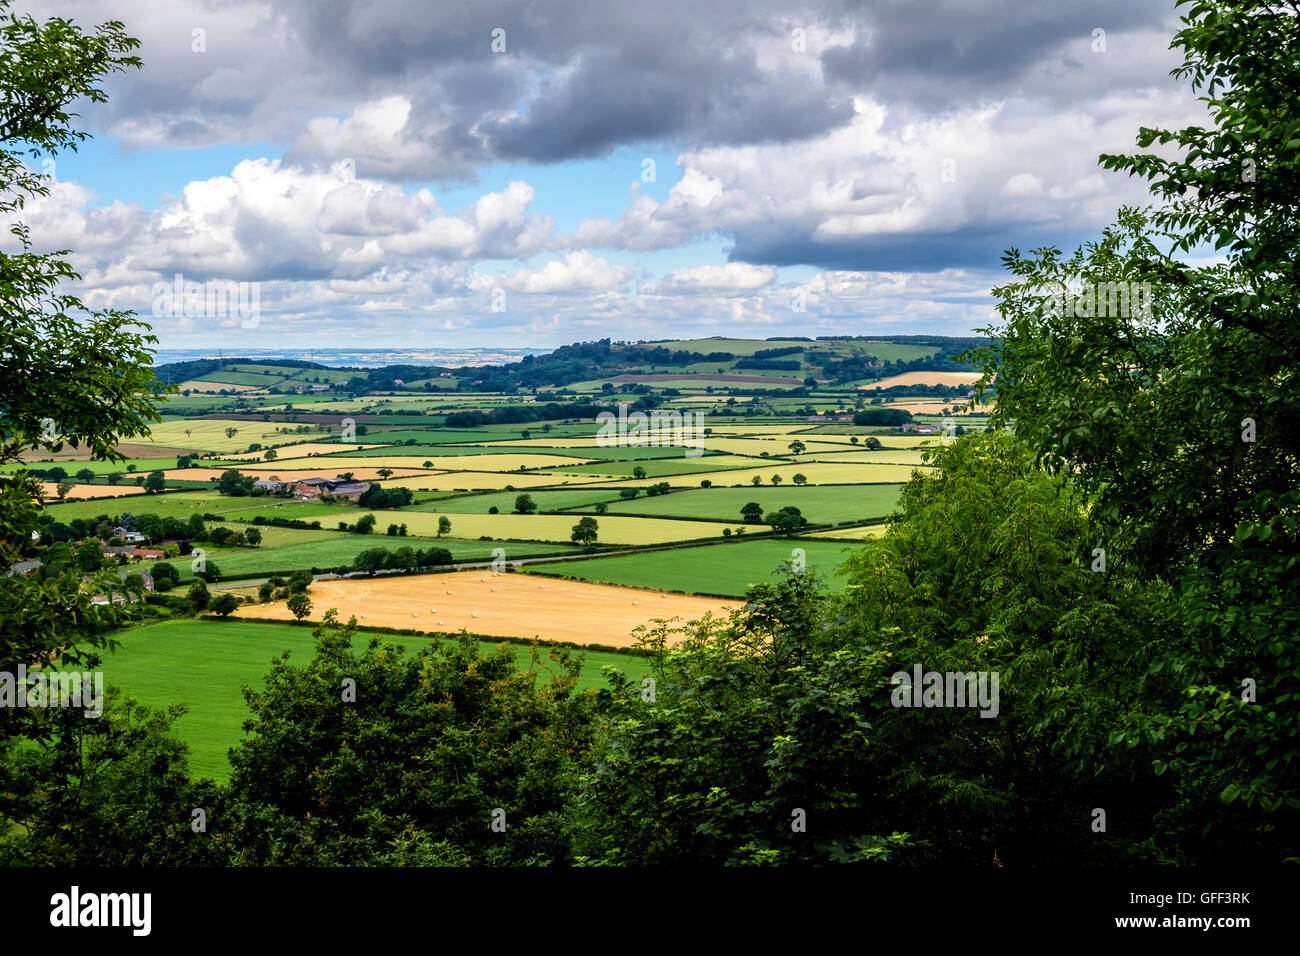 North Yorkshire, England - landscape of typical Yorkshire countryside through a frame of trees with patchwork quilt effect field Stock Photo